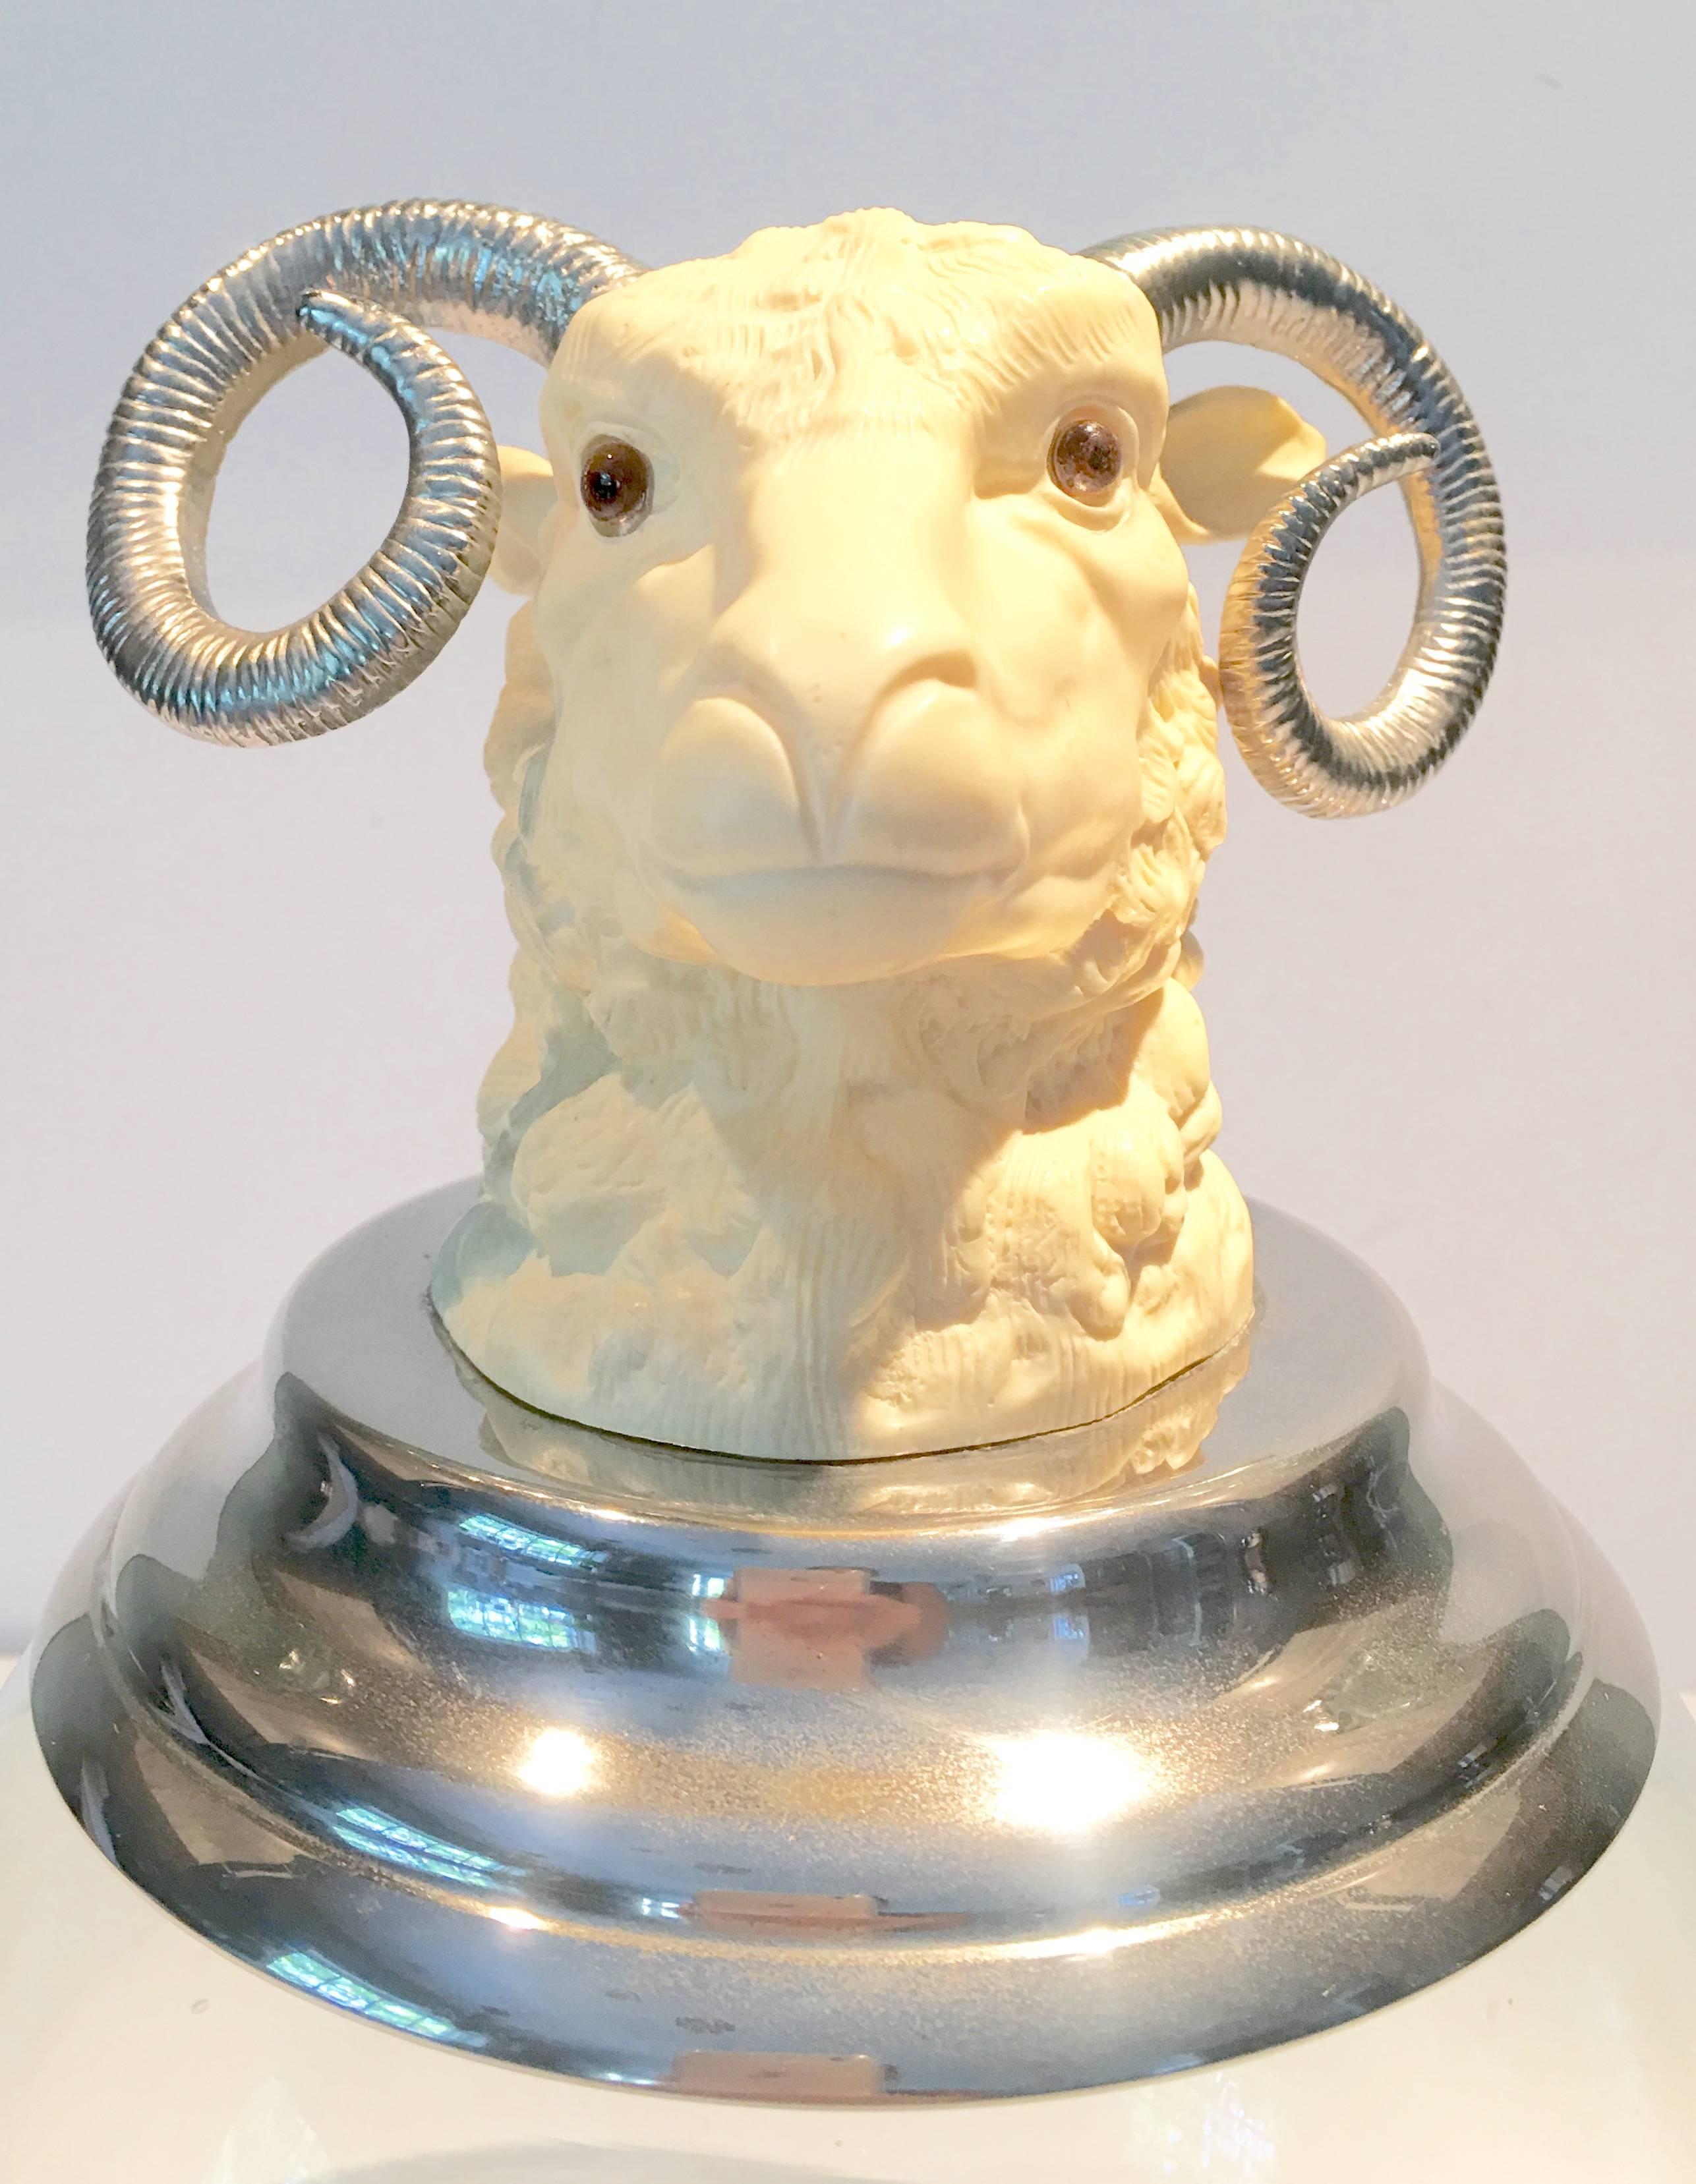 Incredible vintage French ram's head ink well topper. Ram's head is molded resin, pewter horns, silver plate base.. Signed, engraved Hauy Pauitza on the underside of the ram's head. Ram's head measures, 6